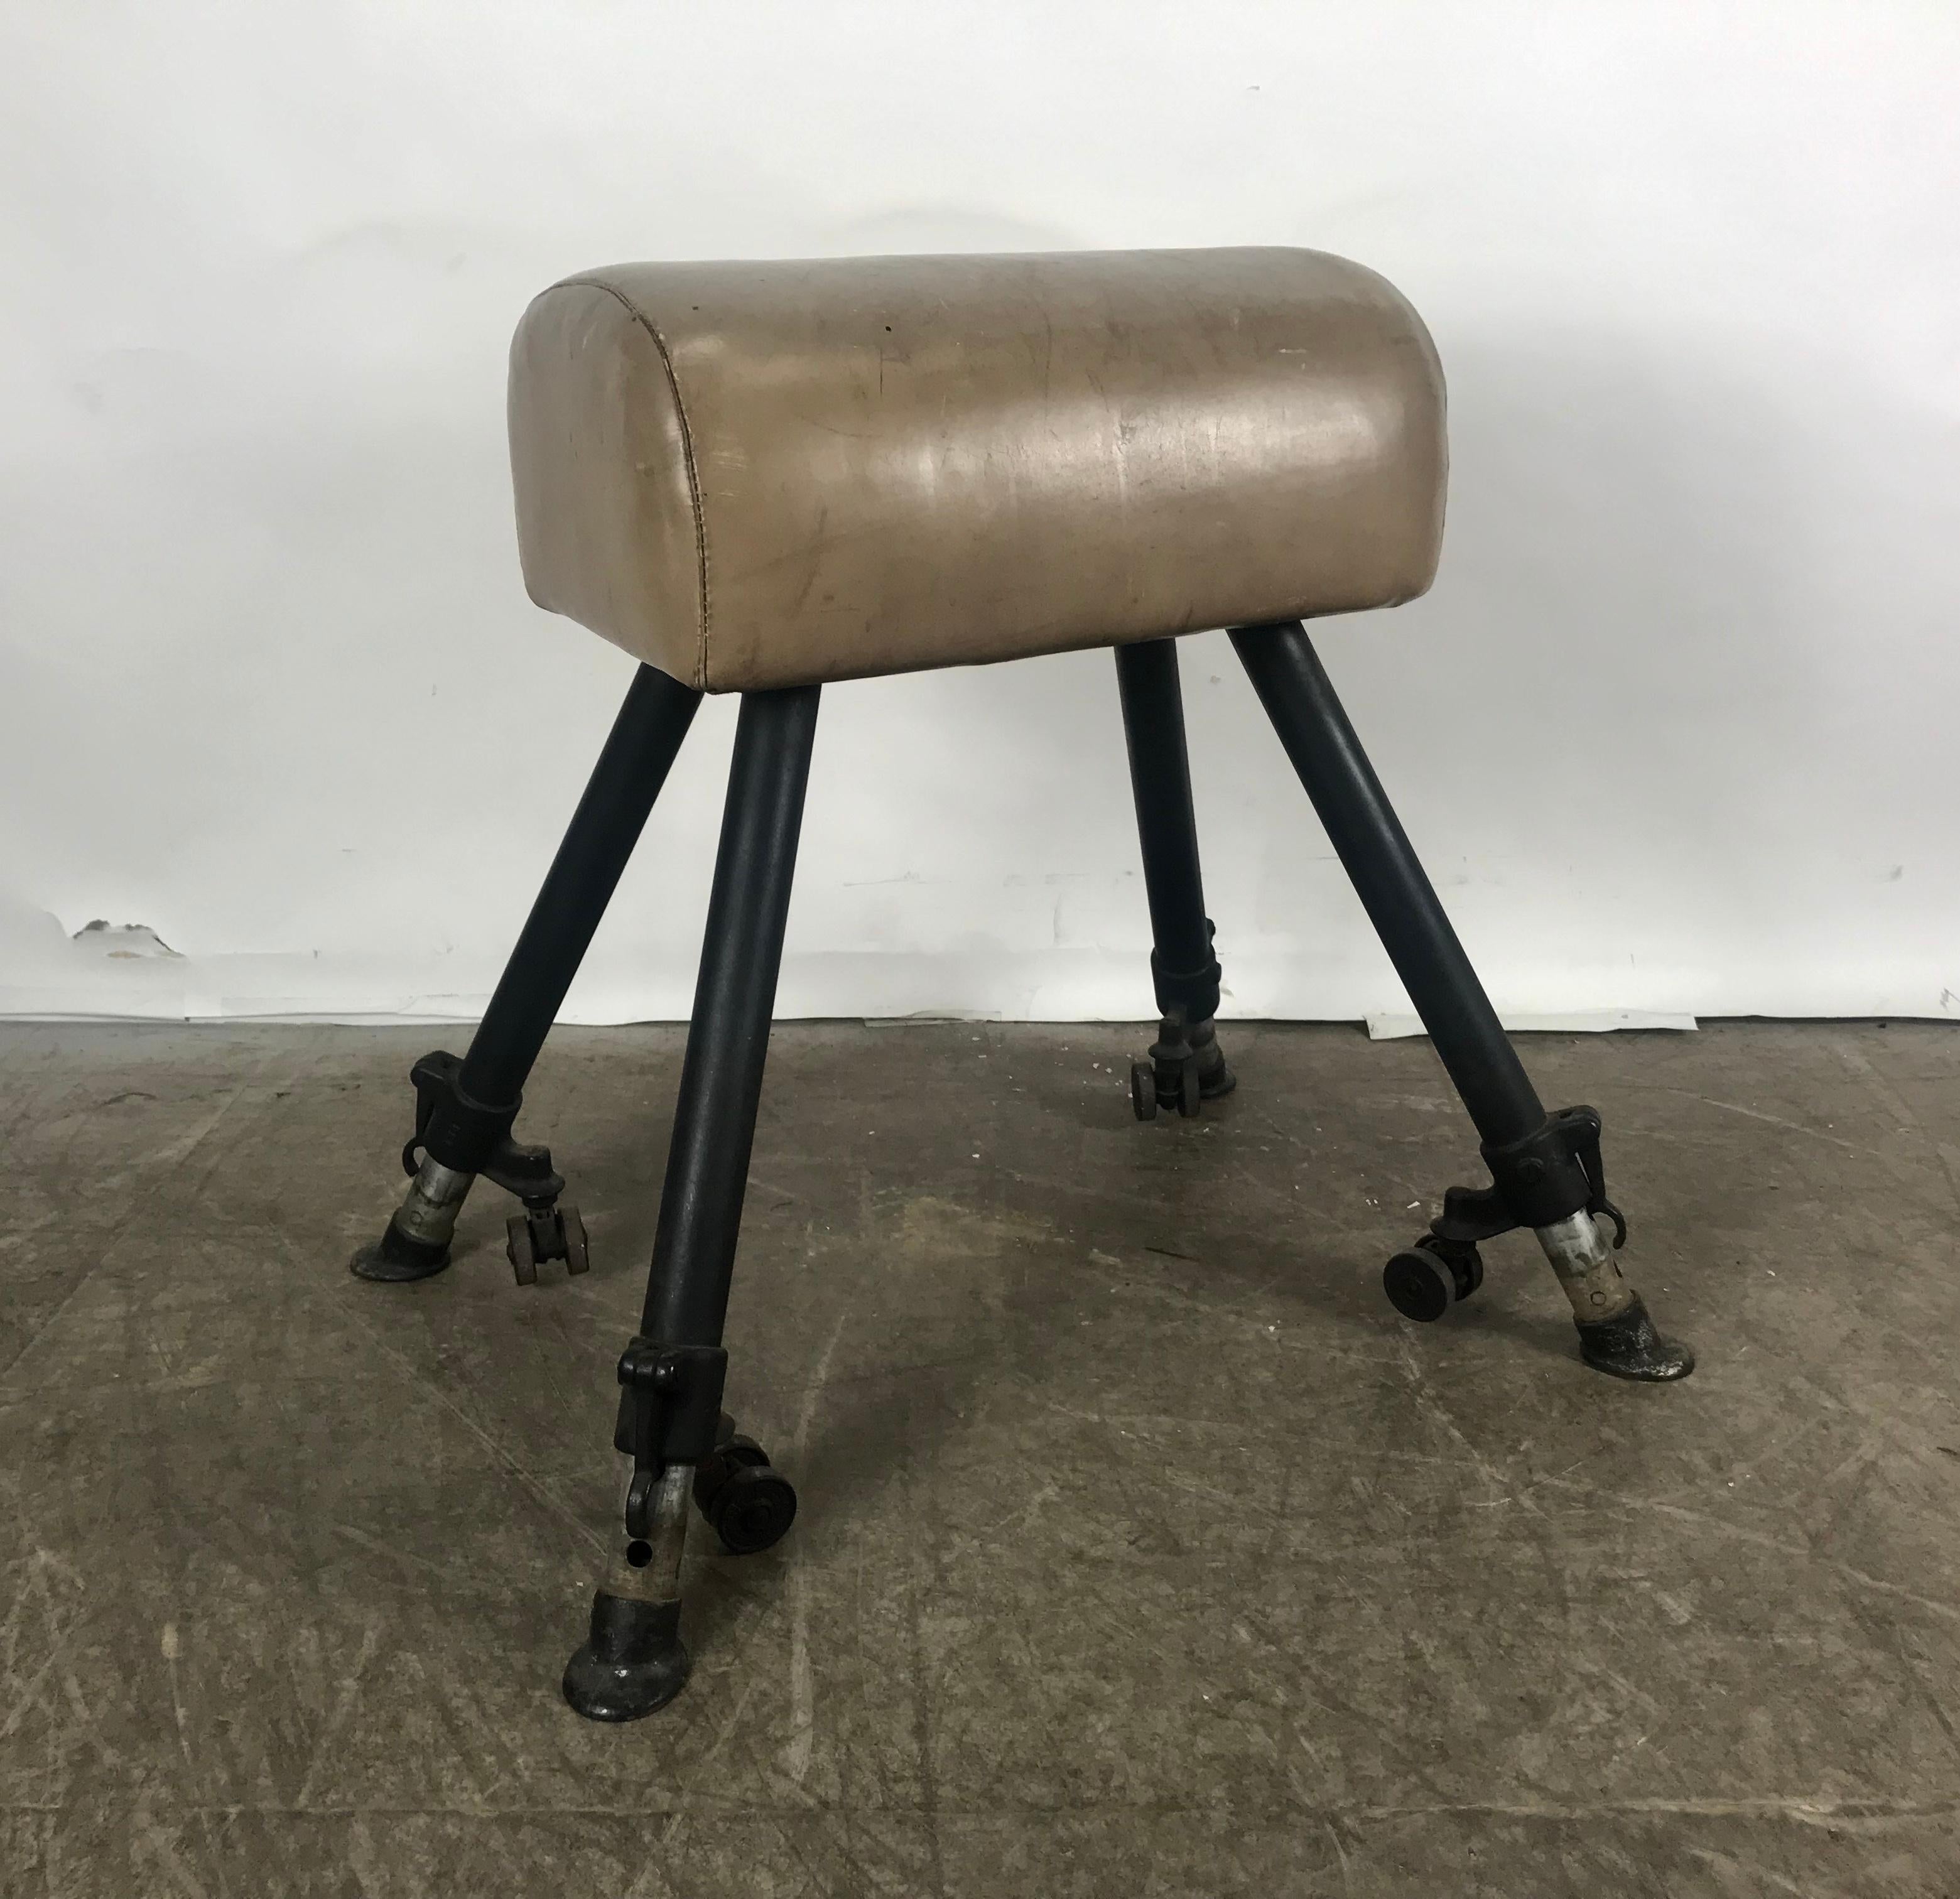 Classic 1920s adjustable height leather and cast iron pommel gym horse, amazing design, proportion and patina. Retains original 'HORSE-HOOF